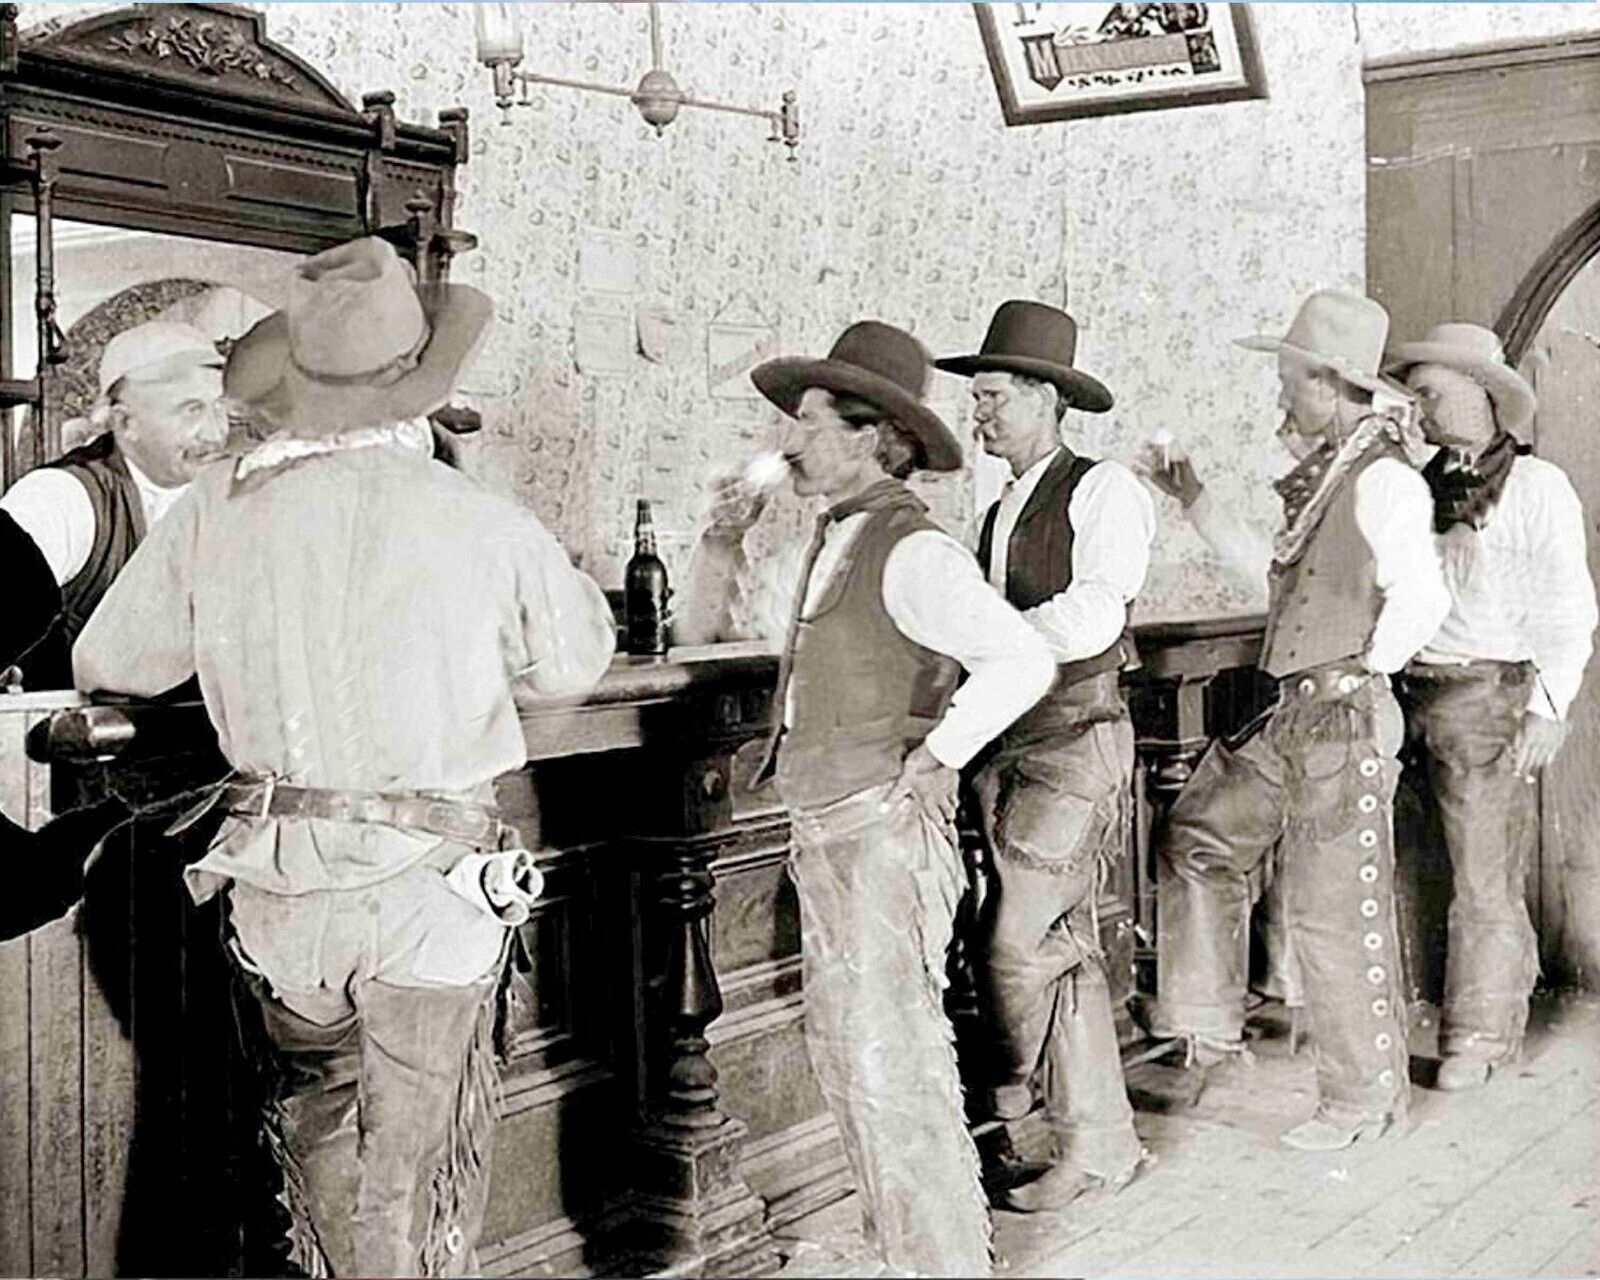 Set of 10 Real Old West Cowboys From the 1800s 11 x 14 Photos